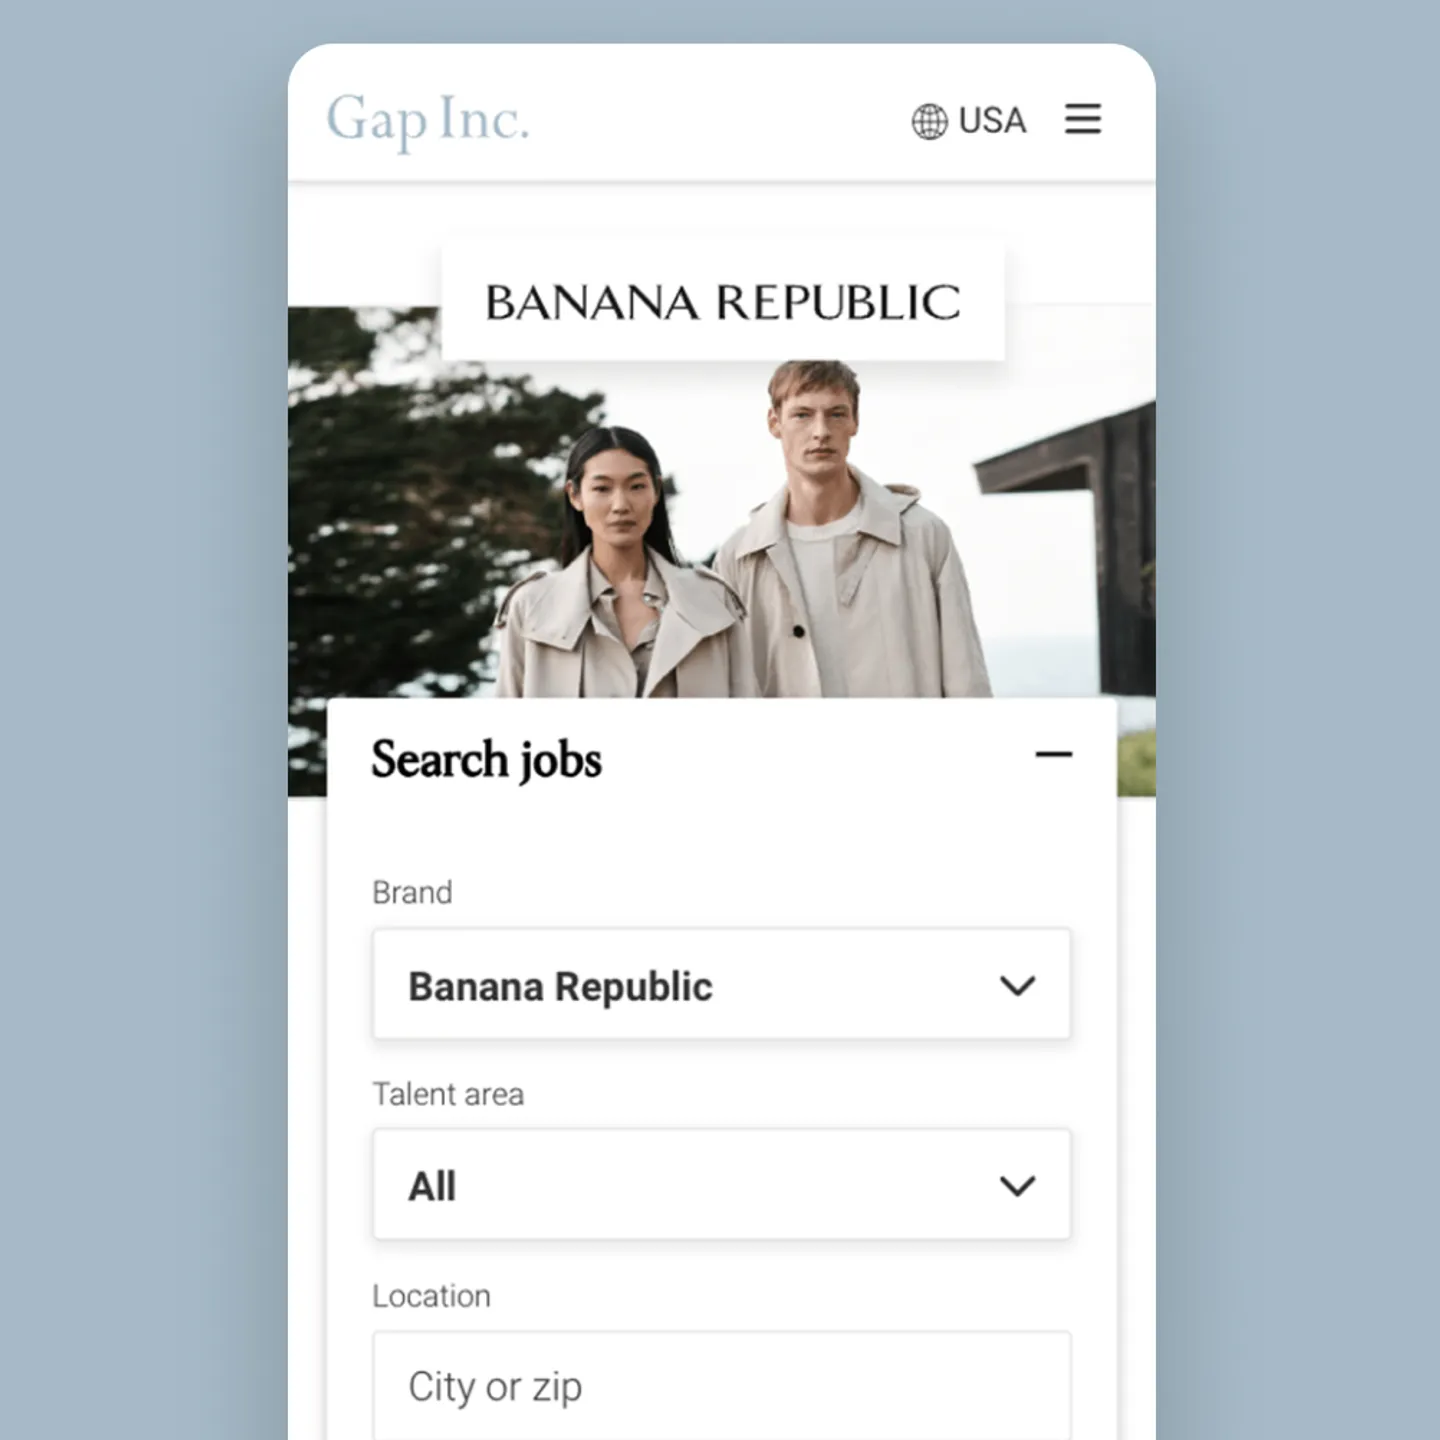 Image of a mobile page design showing a job search tool for Banana Republic